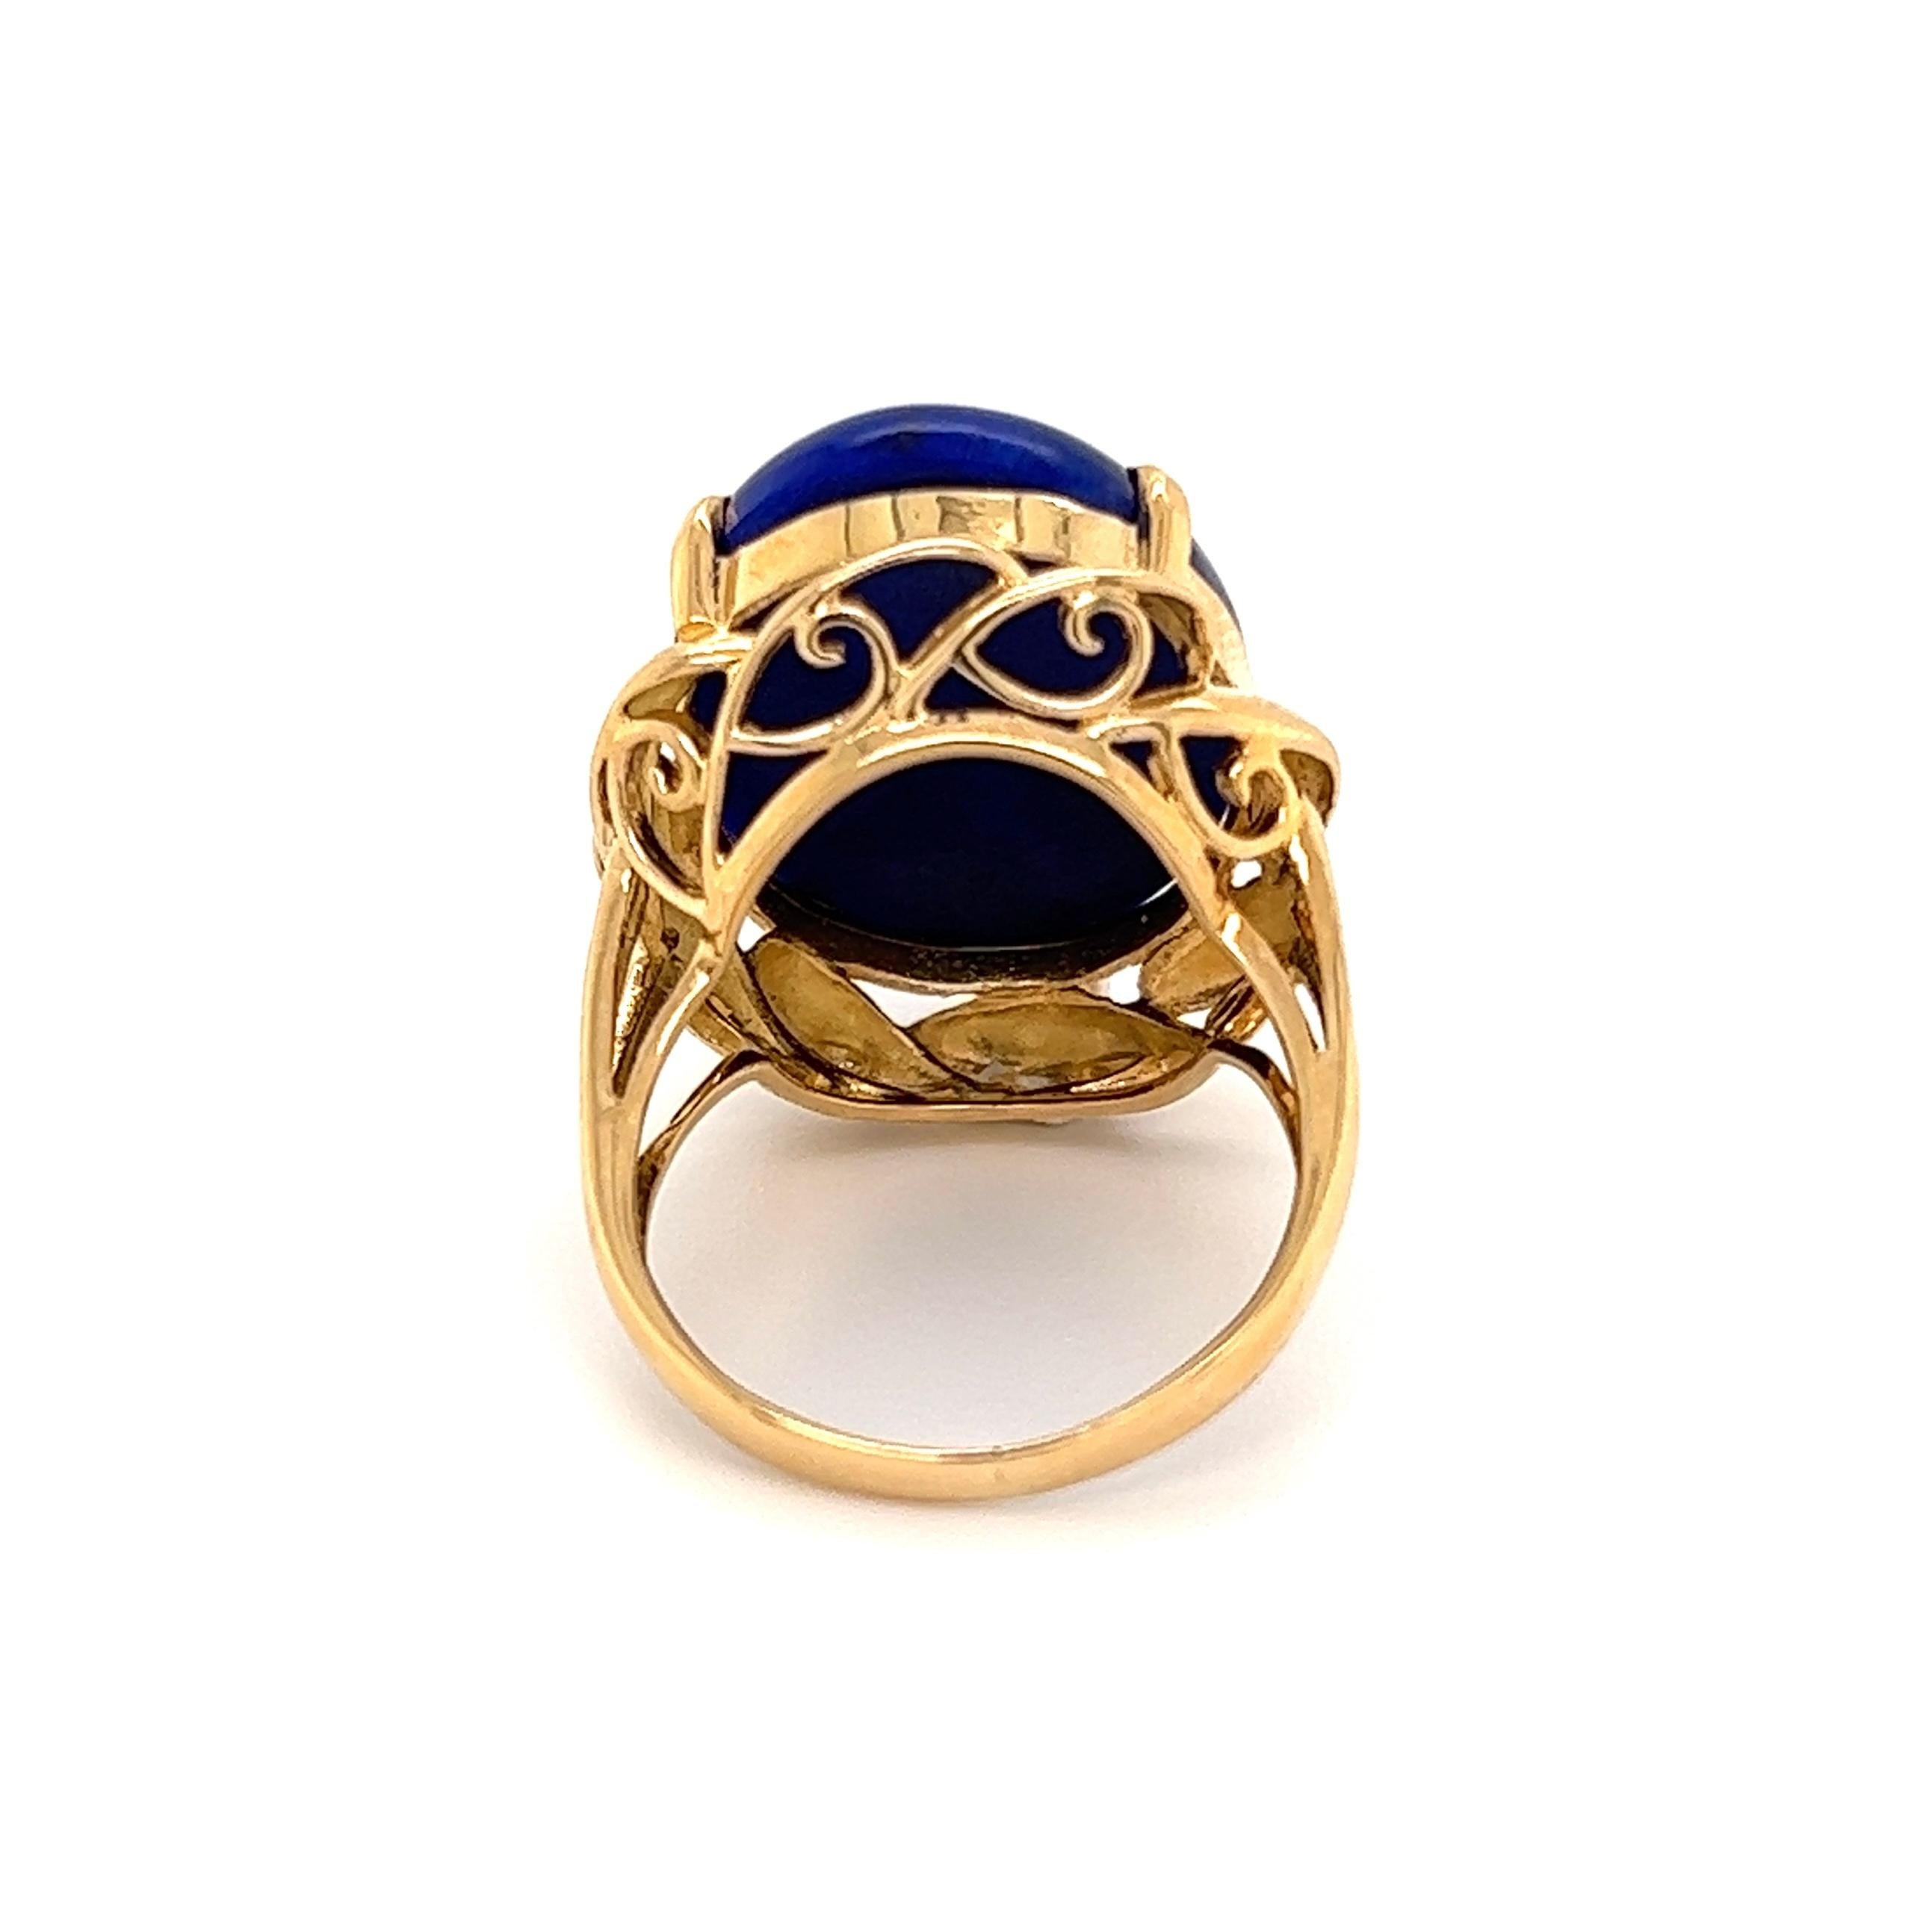 8 Carat Lapis Lazuli Mid-Century Modern Gold Ring Estate Fine Jewelry In Excellent Condition For Sale In Montreal, QC